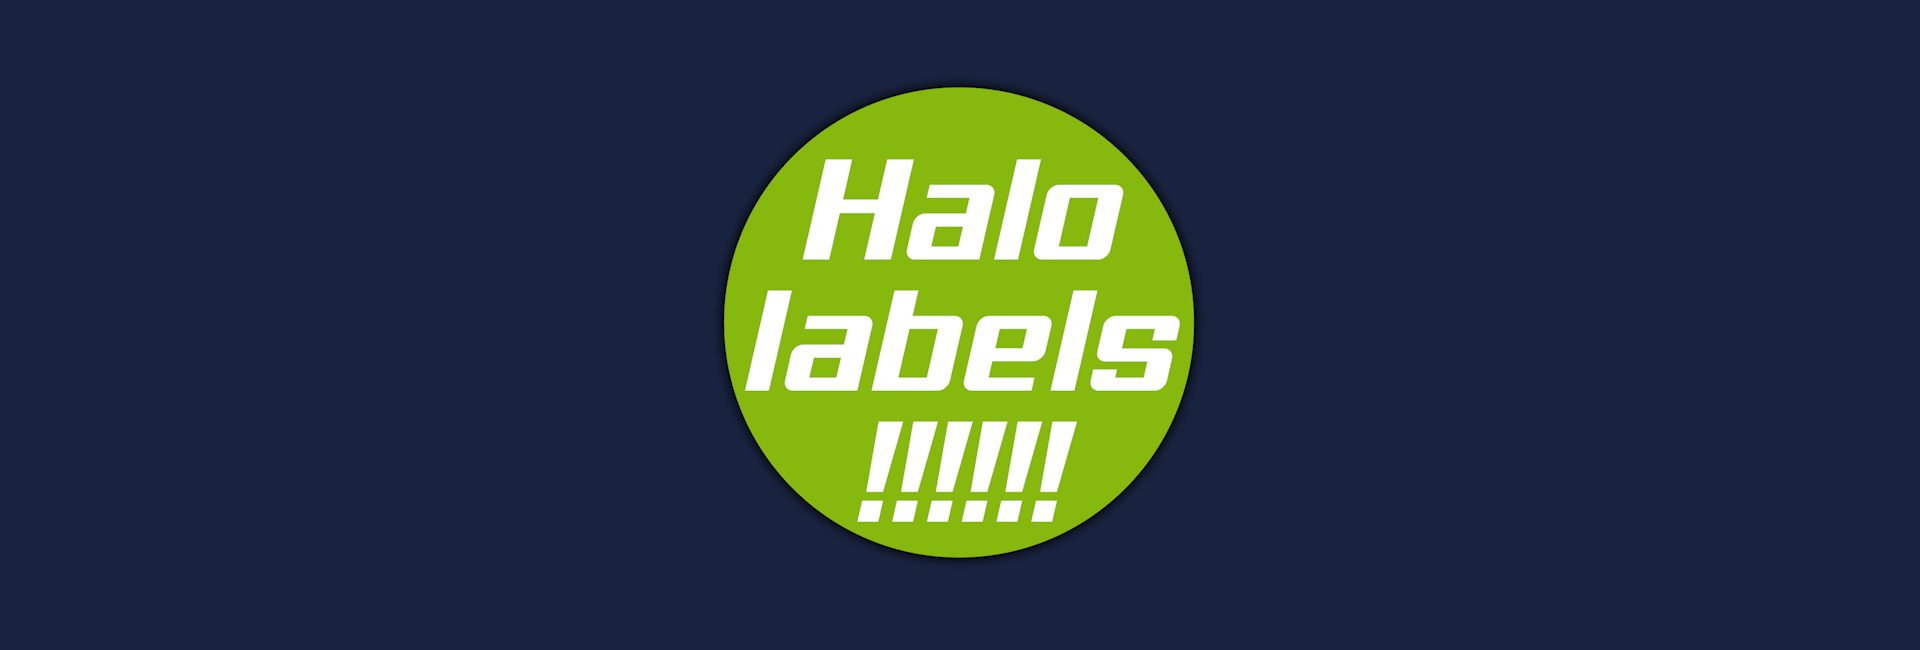 abberior Halo labels for the HaloTag® technogie